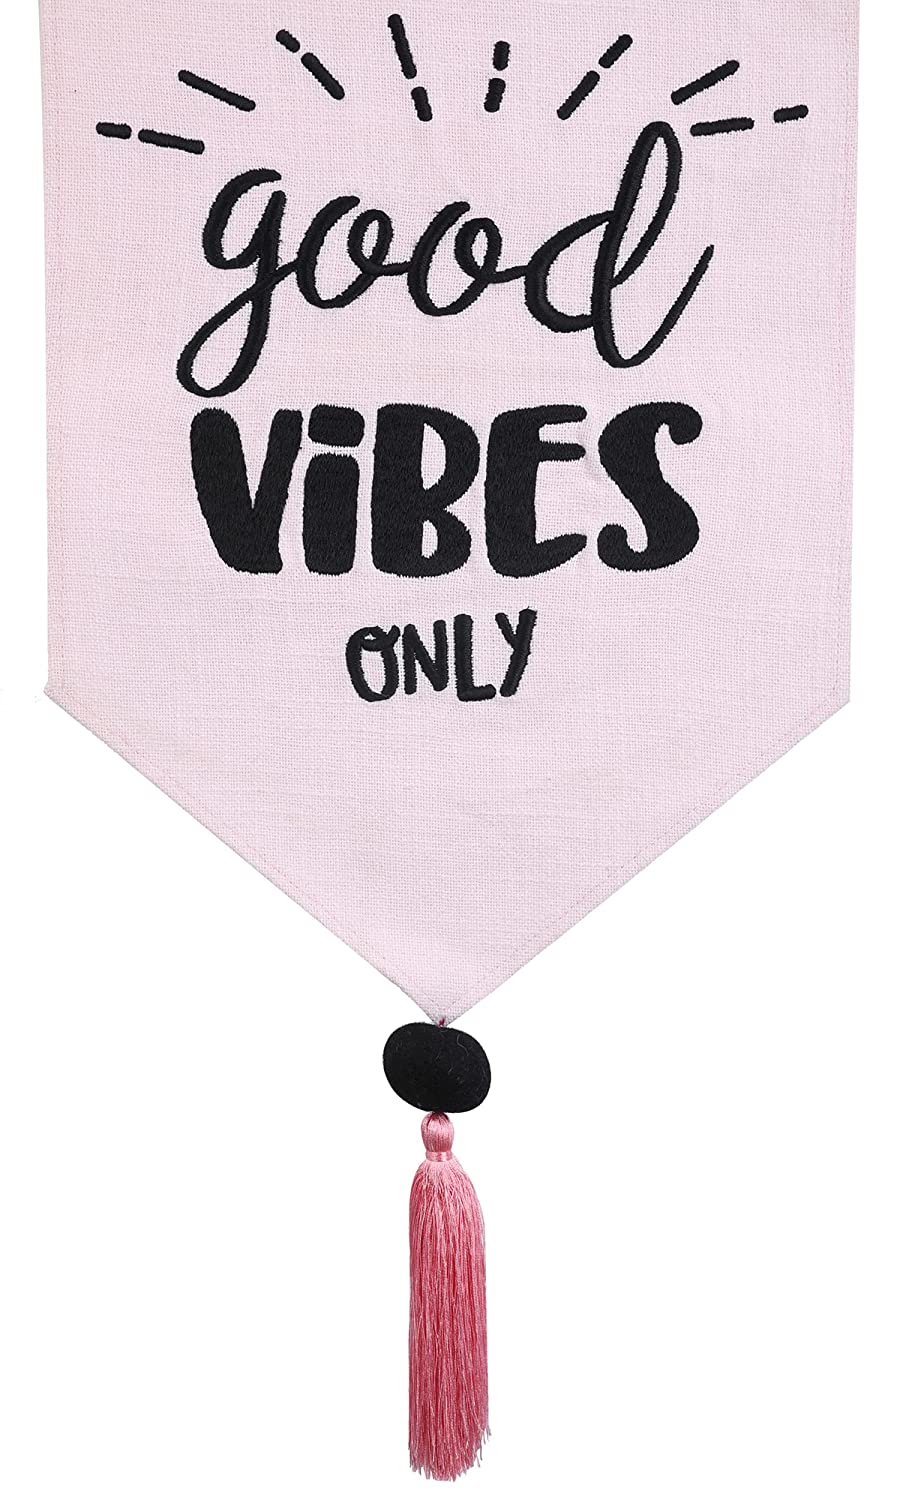  Treasure Hunt® Fabric Wall Hangings for Home Decoration Banner 'Good Vibes ONLY'| Book Bargain Buy